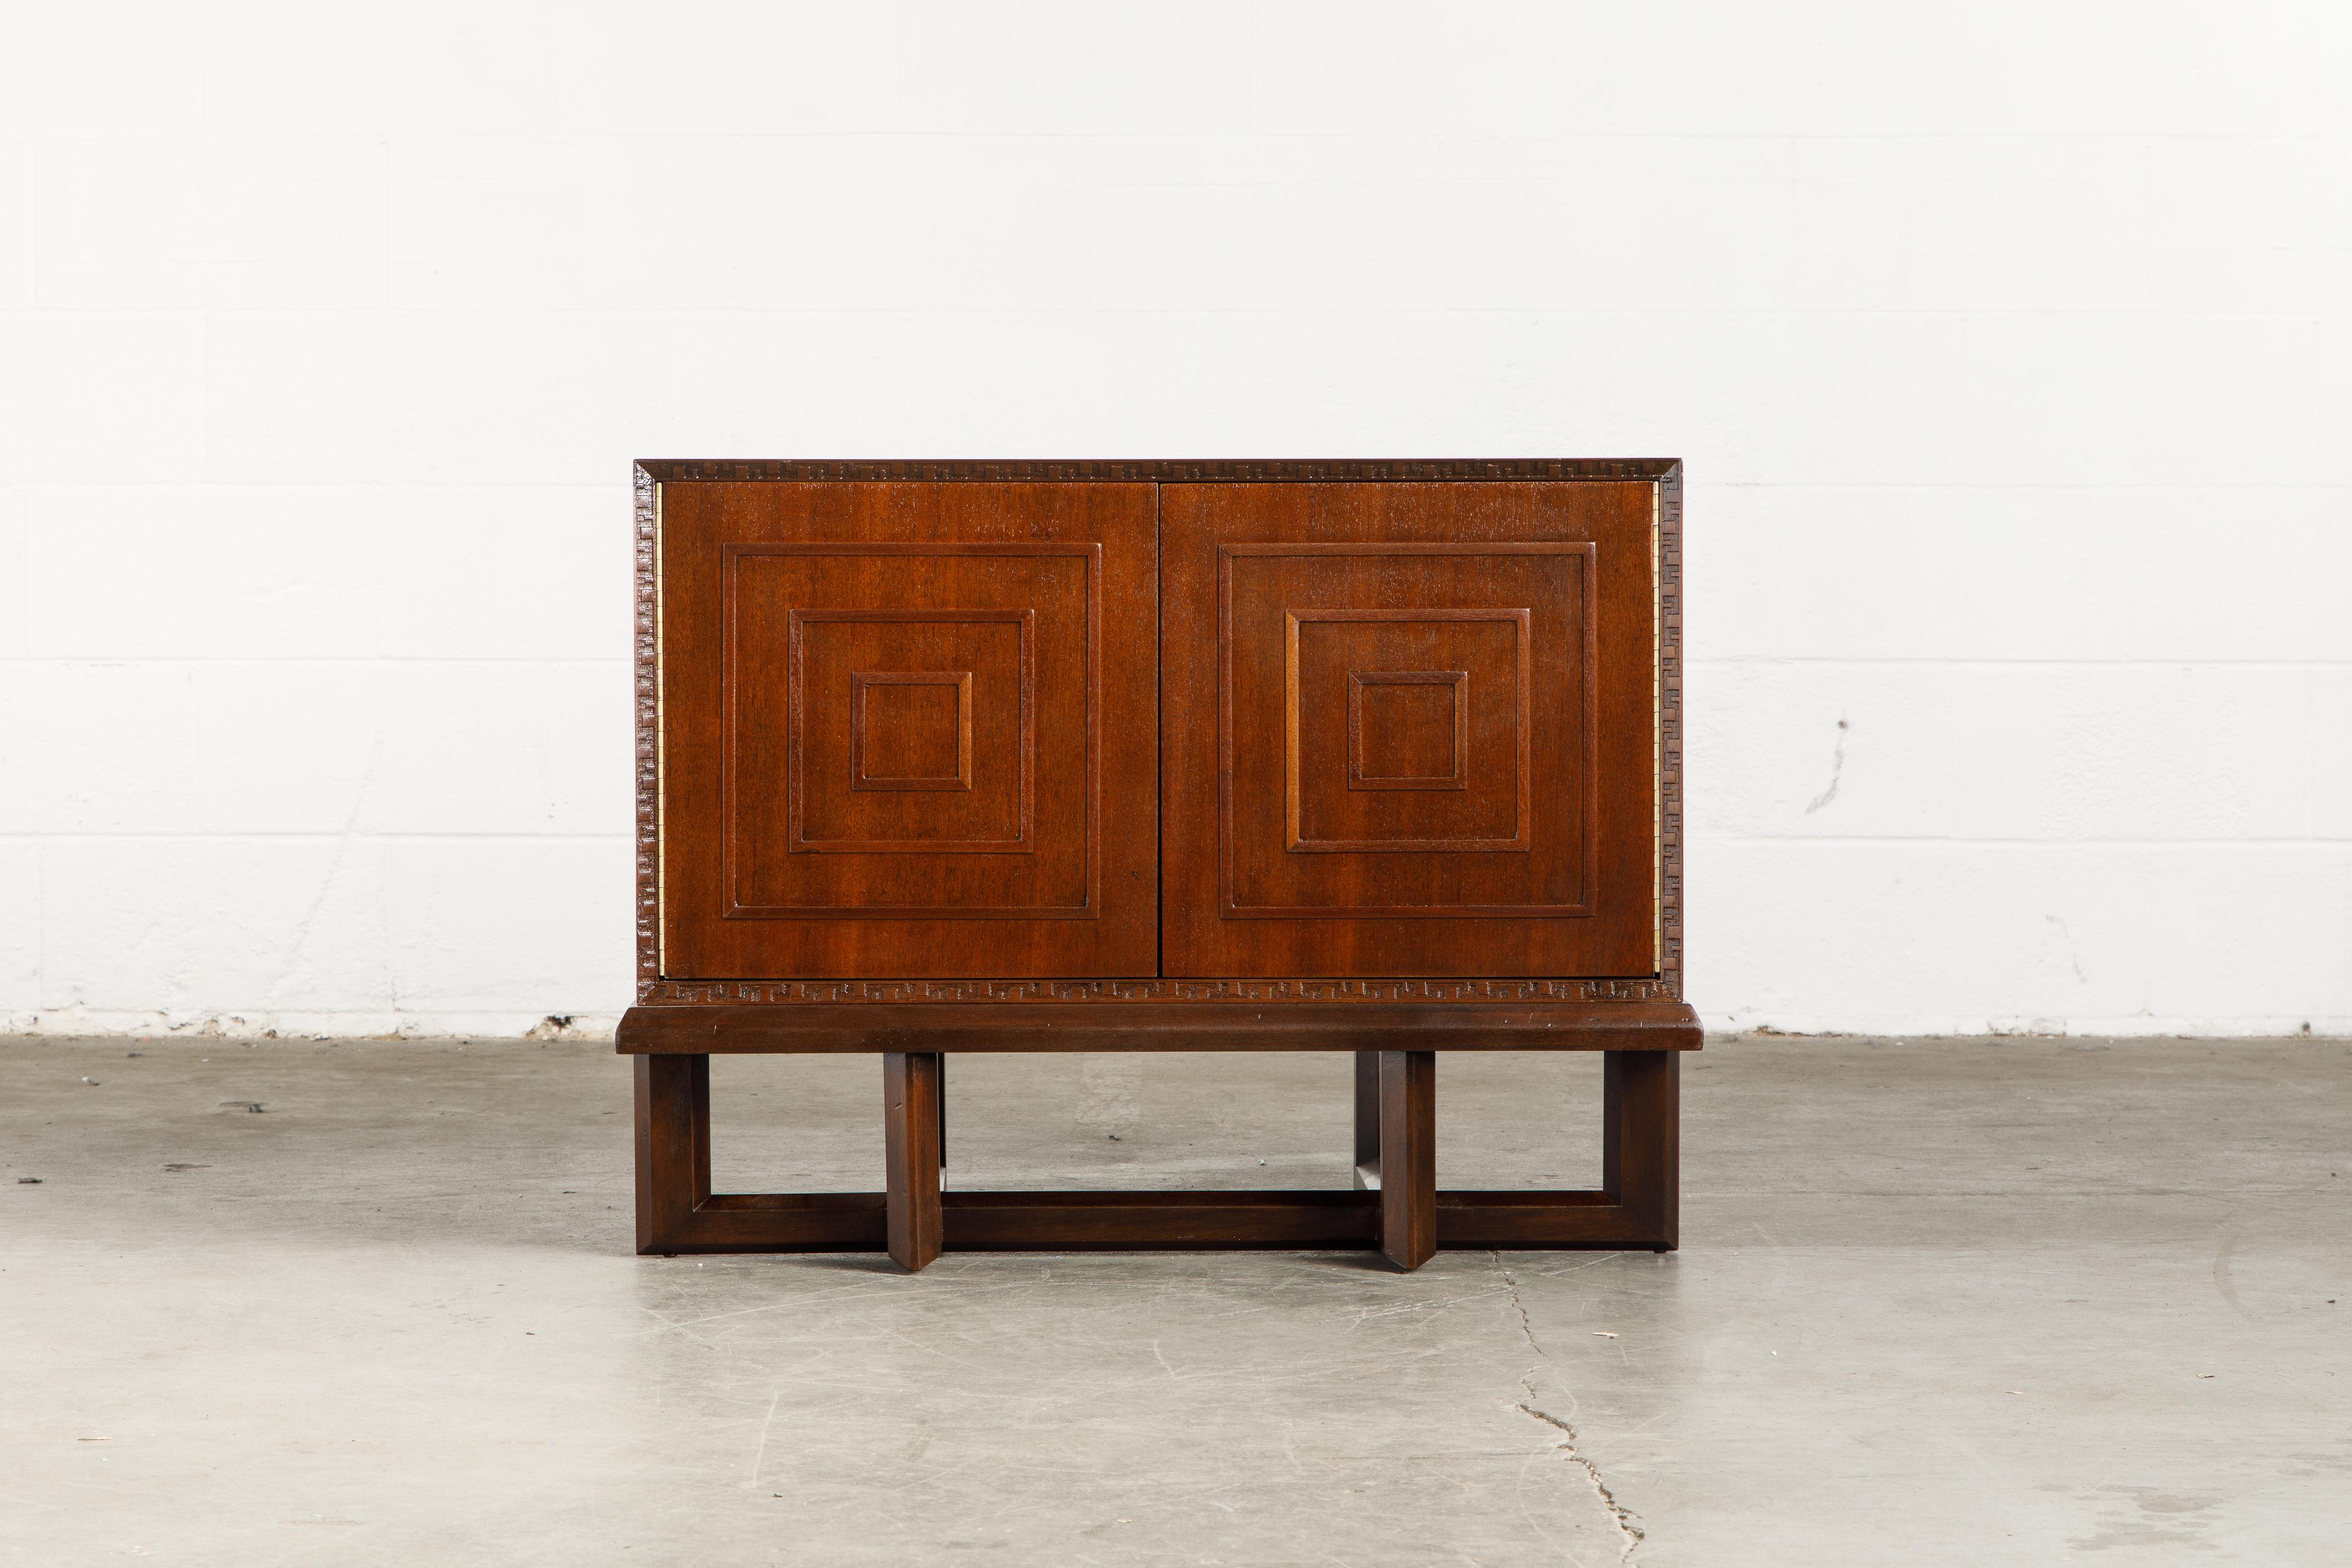 This gorgeously refinished Honduran Mahogany 'Taliesin' Model #2005 Special Cabinet on Stand was designed by Frank Lloyd Wright for Heritage-Henredon in 1955 and produced only for two years, therefore is now a highly sought-after and rare collectors